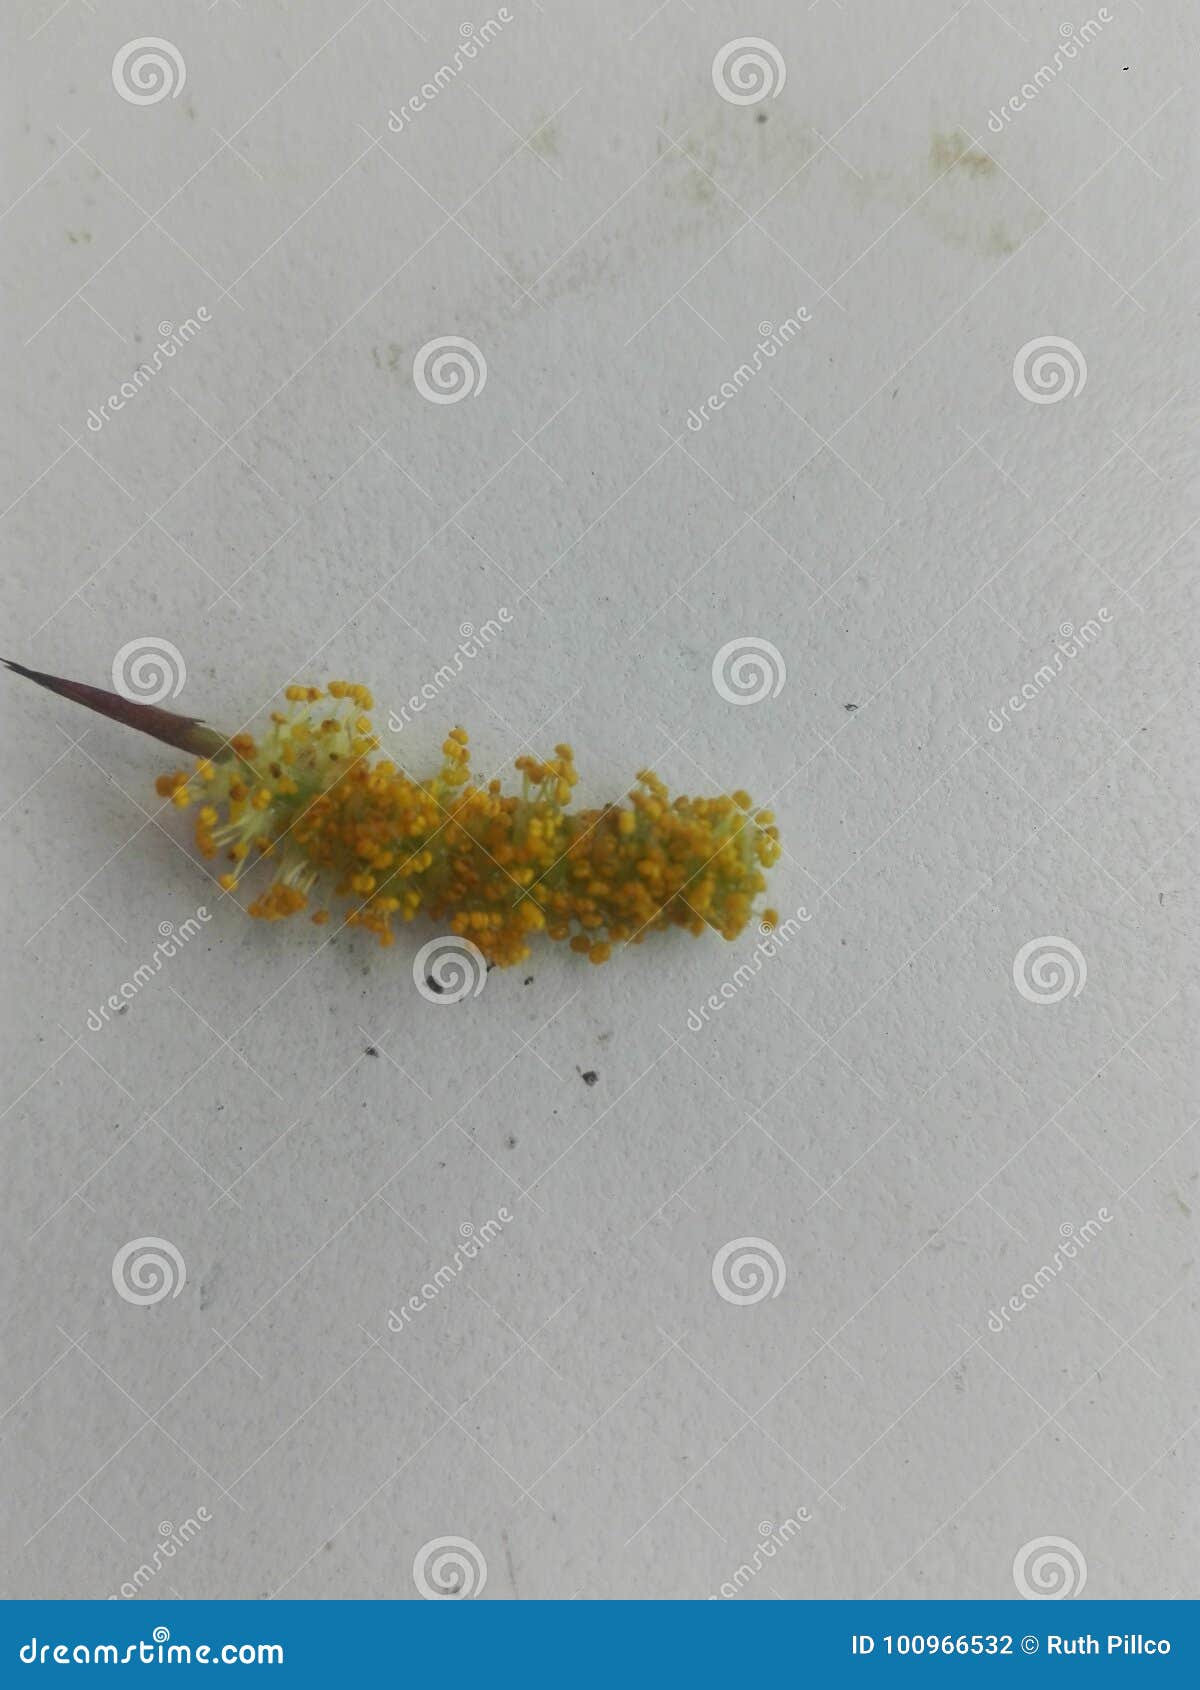 inflorescence amento in laboratoy is a orbamental plant